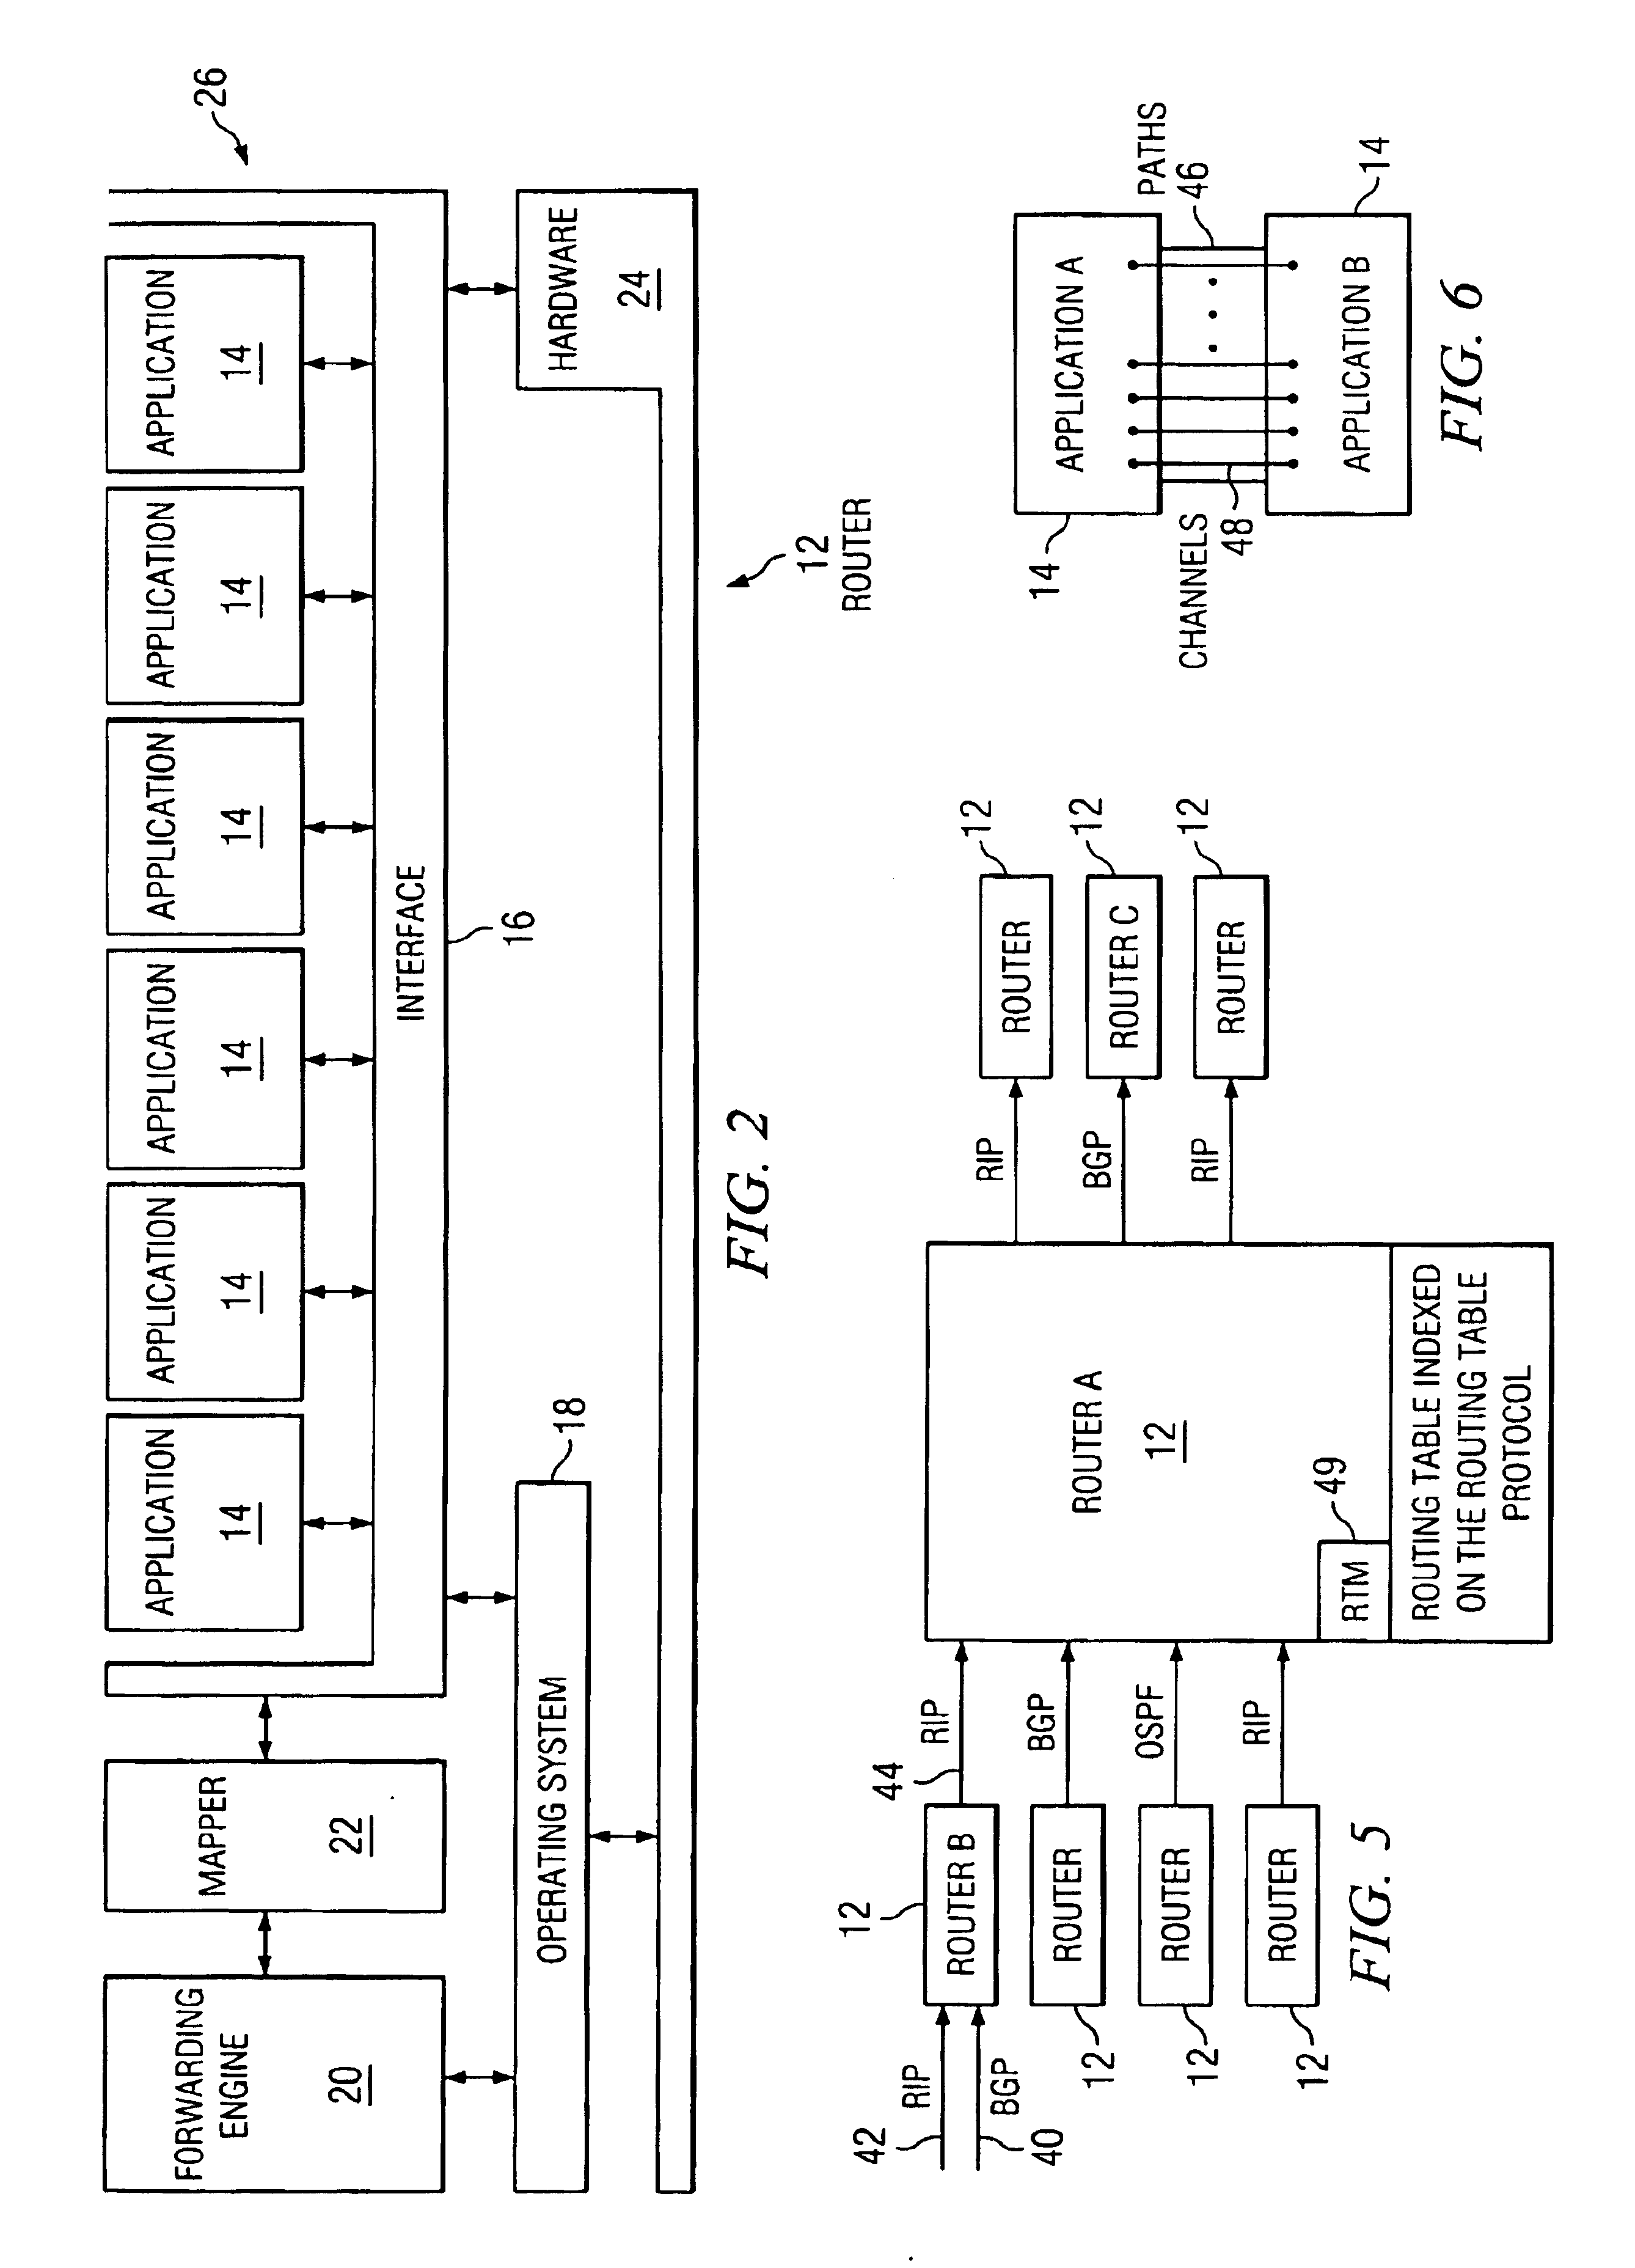 Apparatus and method for monitoring messages forwarded between applications